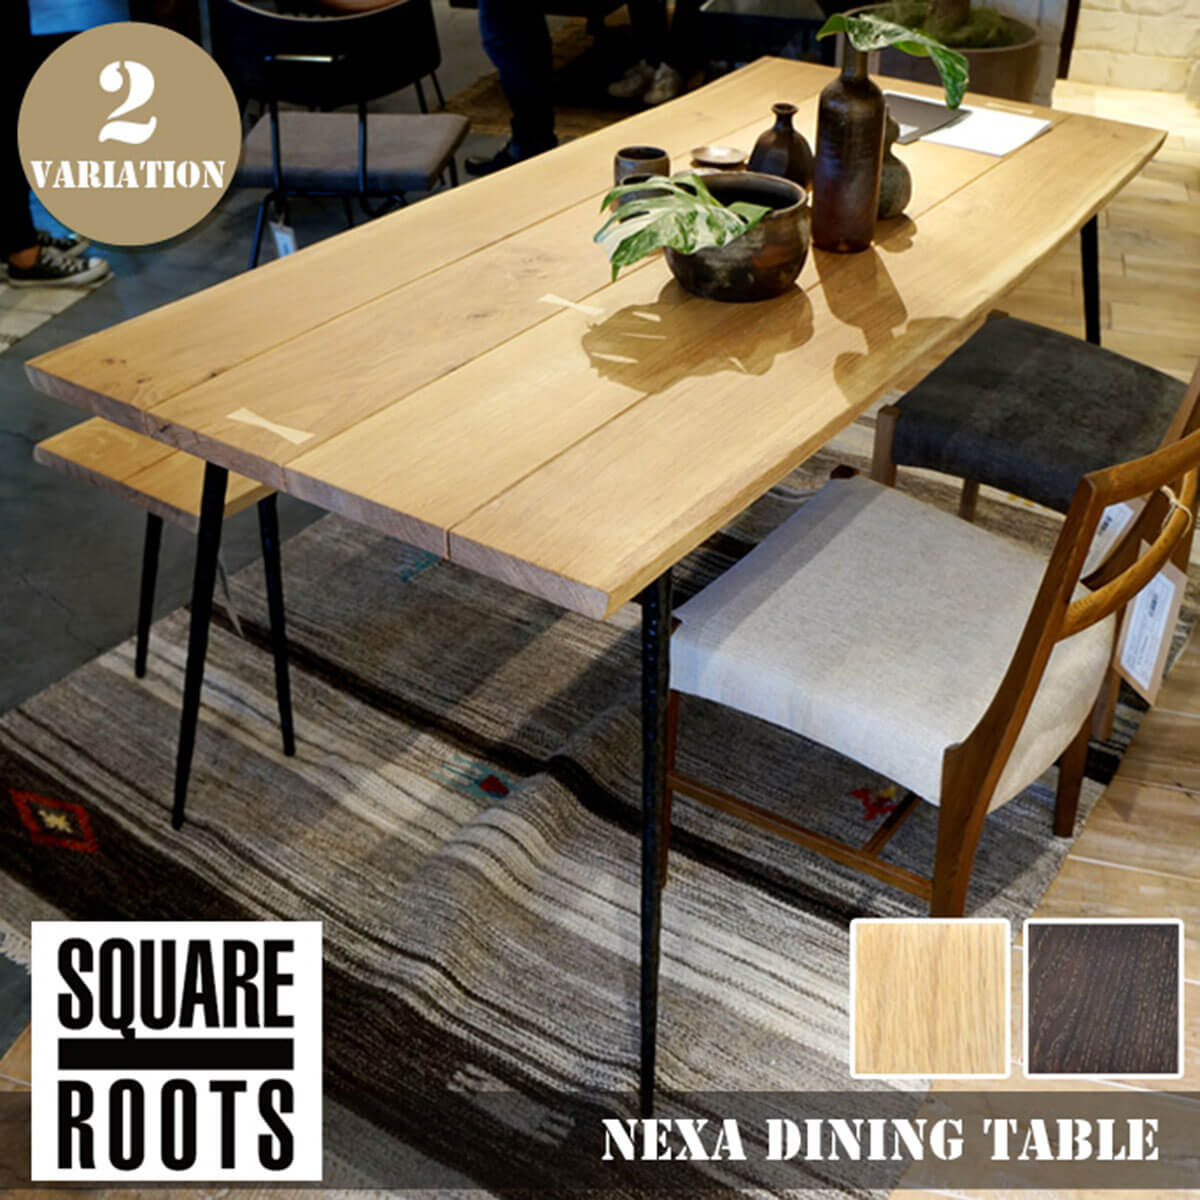 SQUARE ROOTS NEXA DINING TABLE